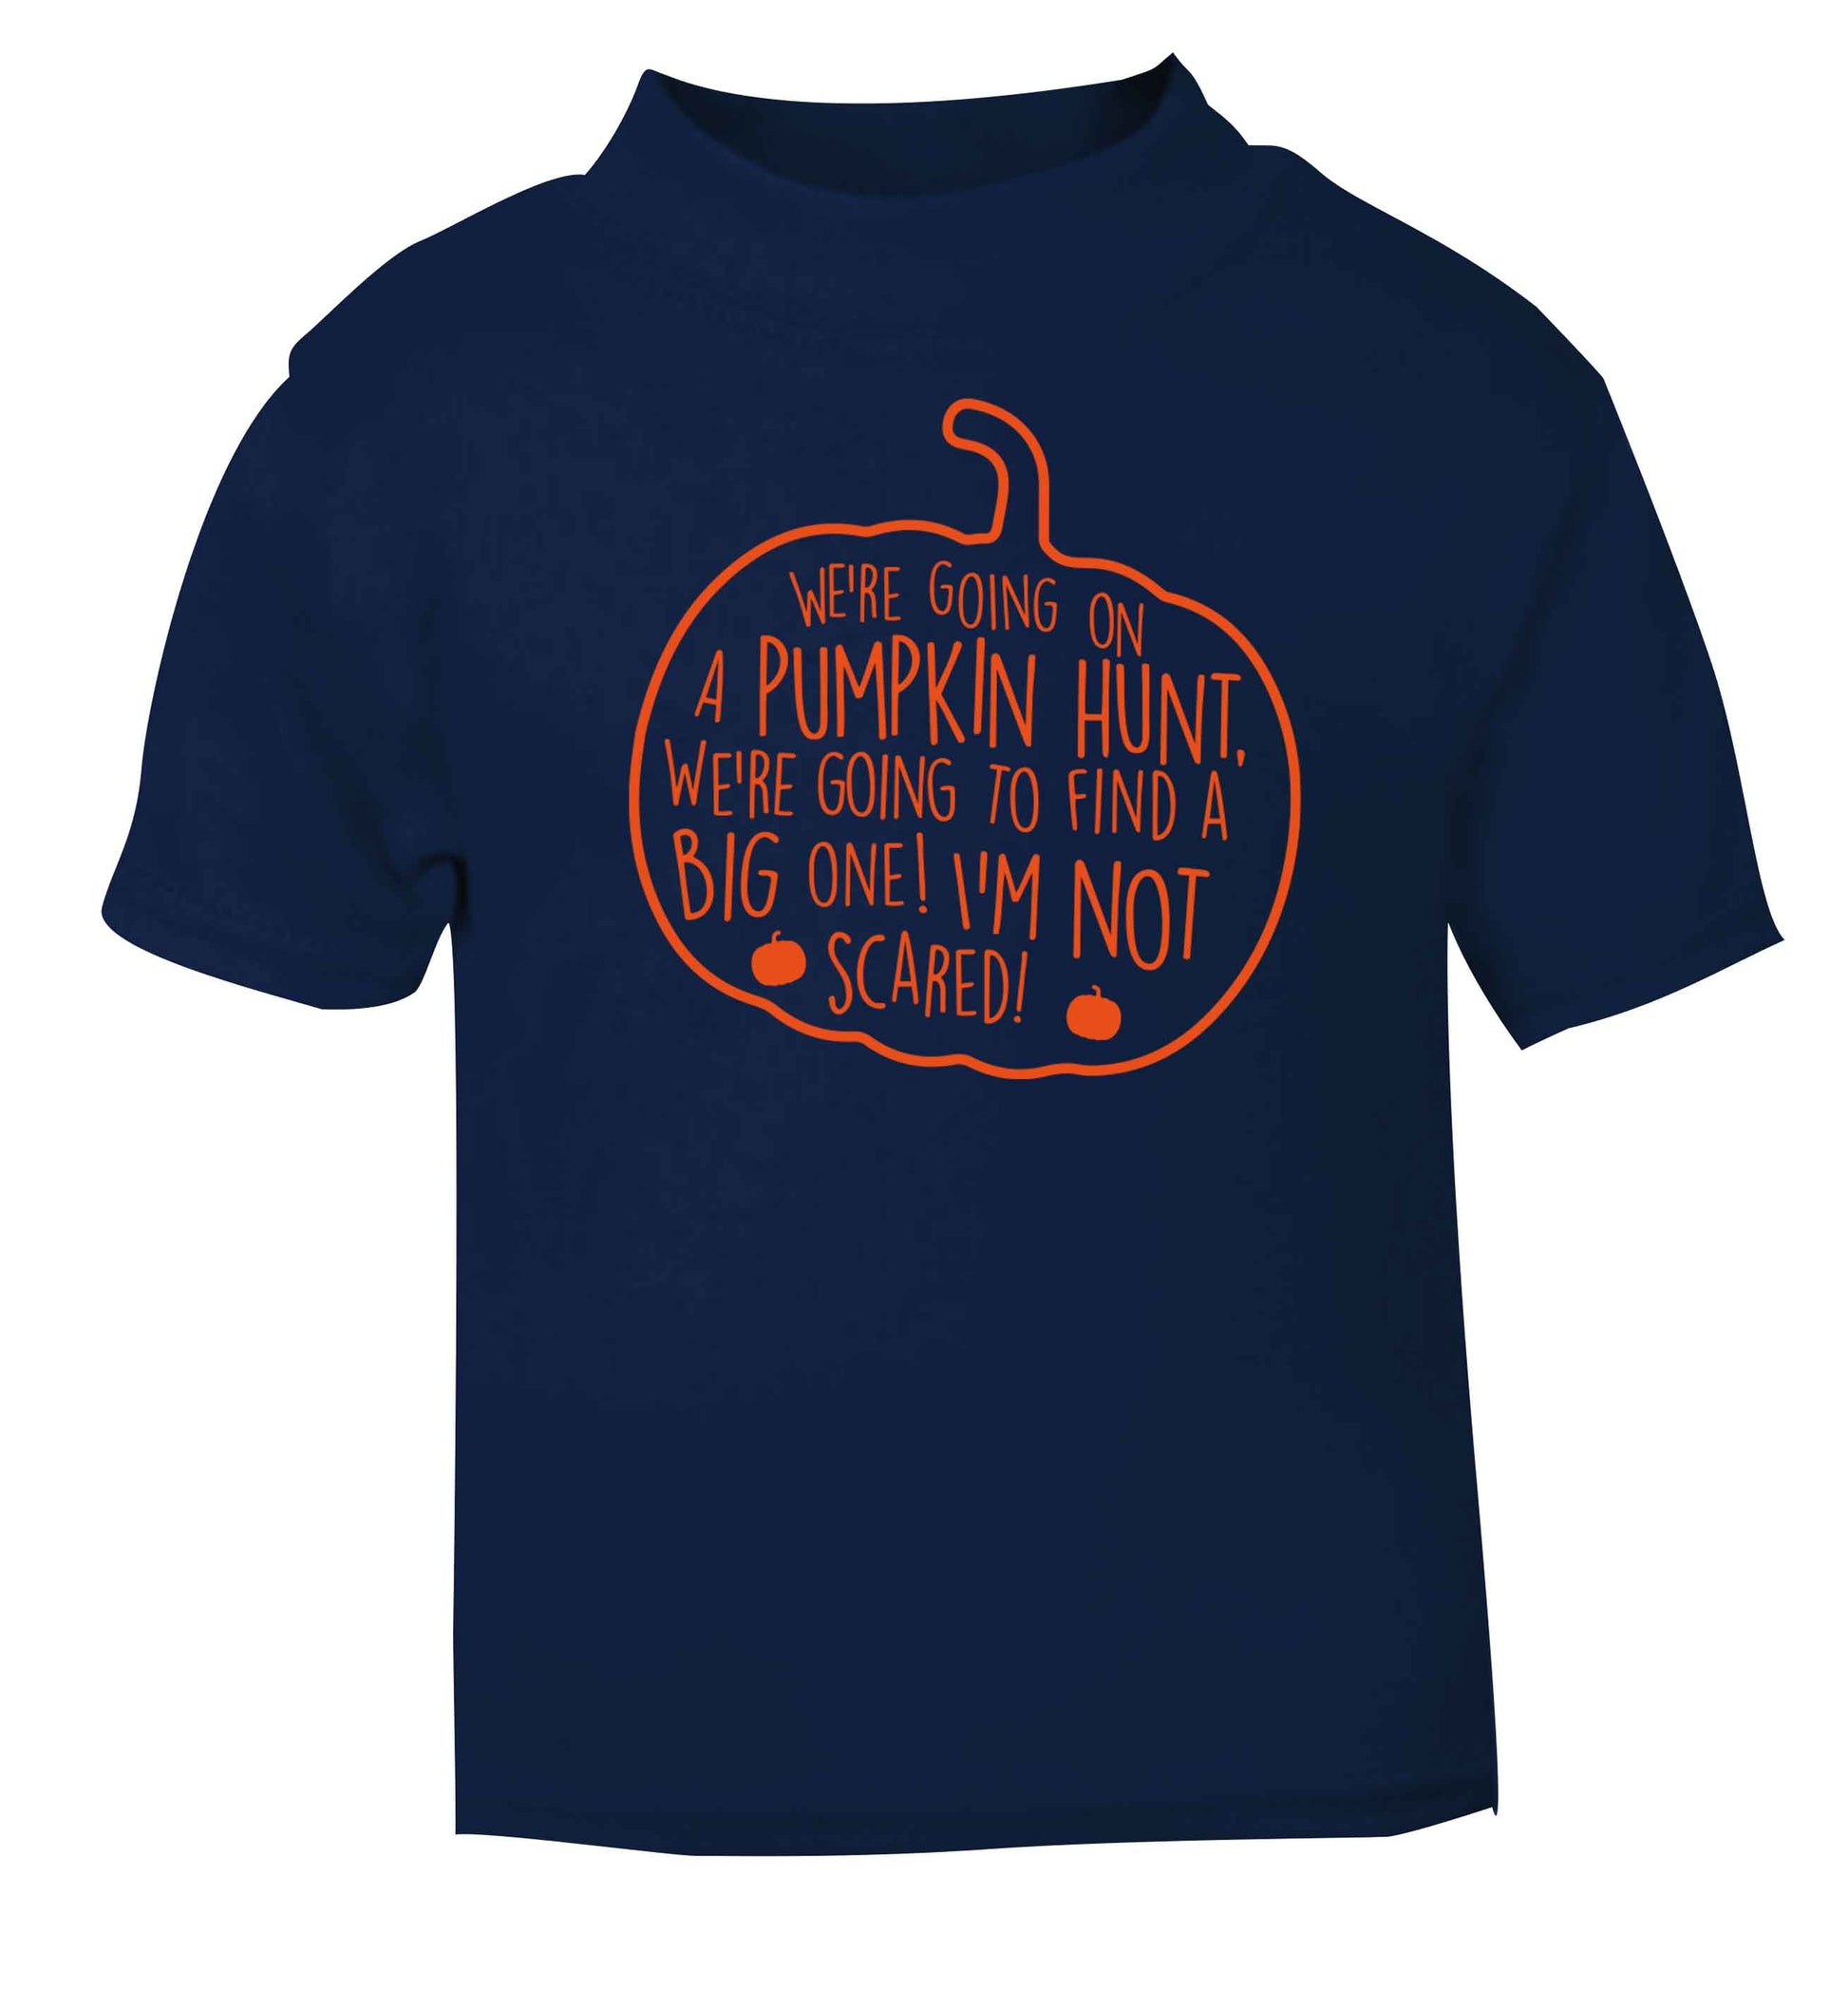 We're going on a pumpkin hunt navy baby toddler Tshirt 2 Years